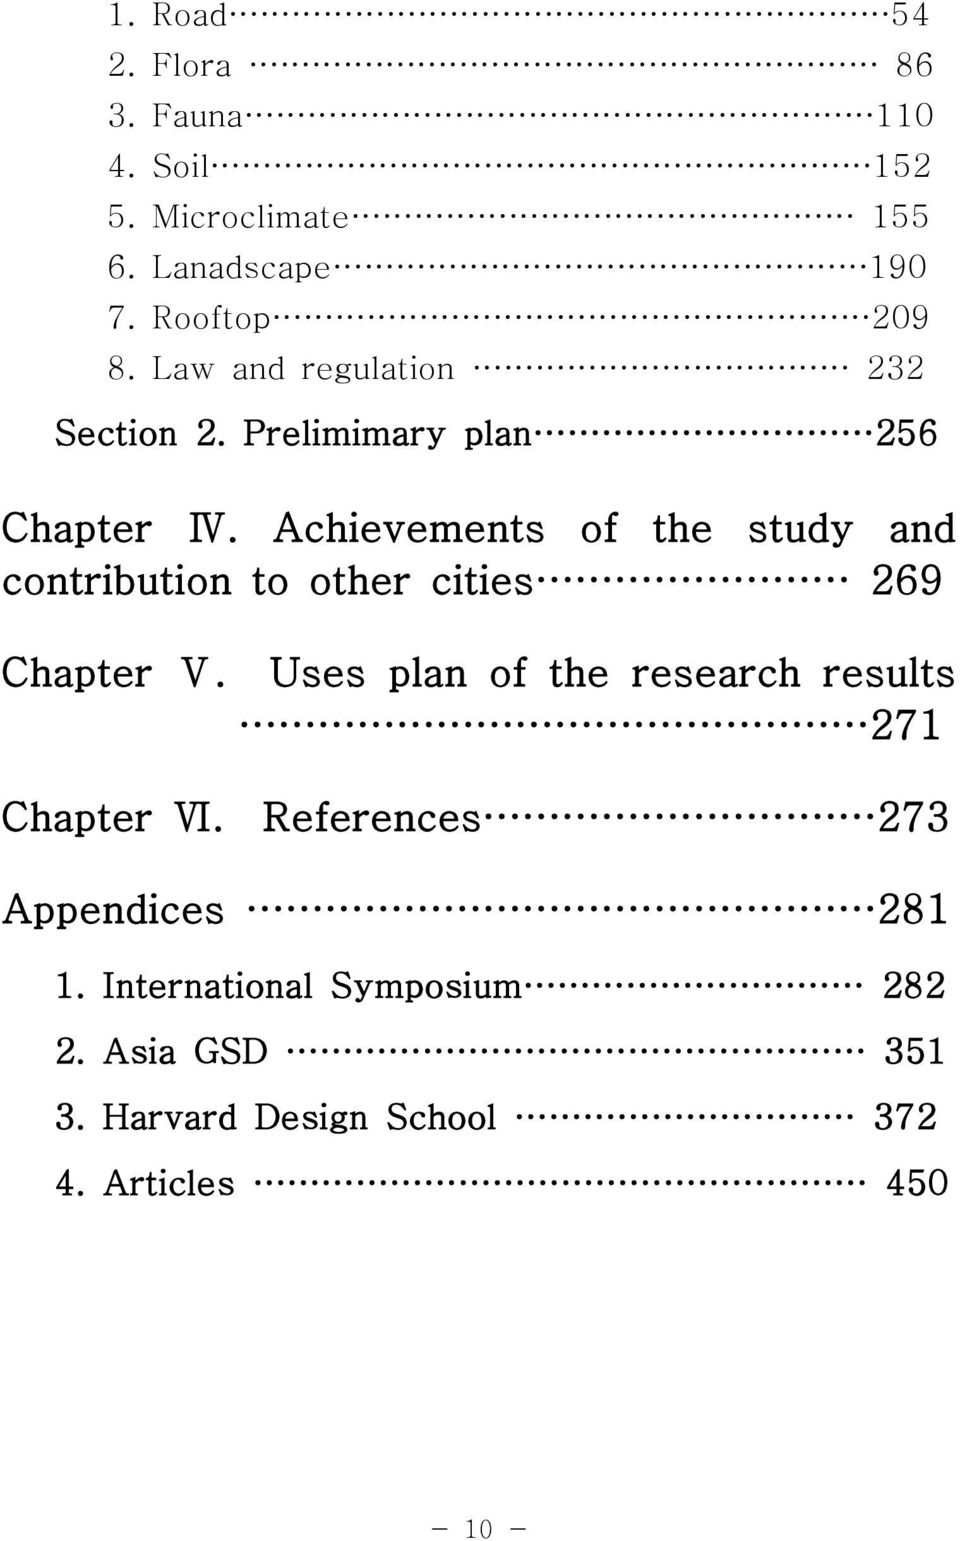 Achievements of the study and contribution to other cities 269 Chapter Ⅴ.